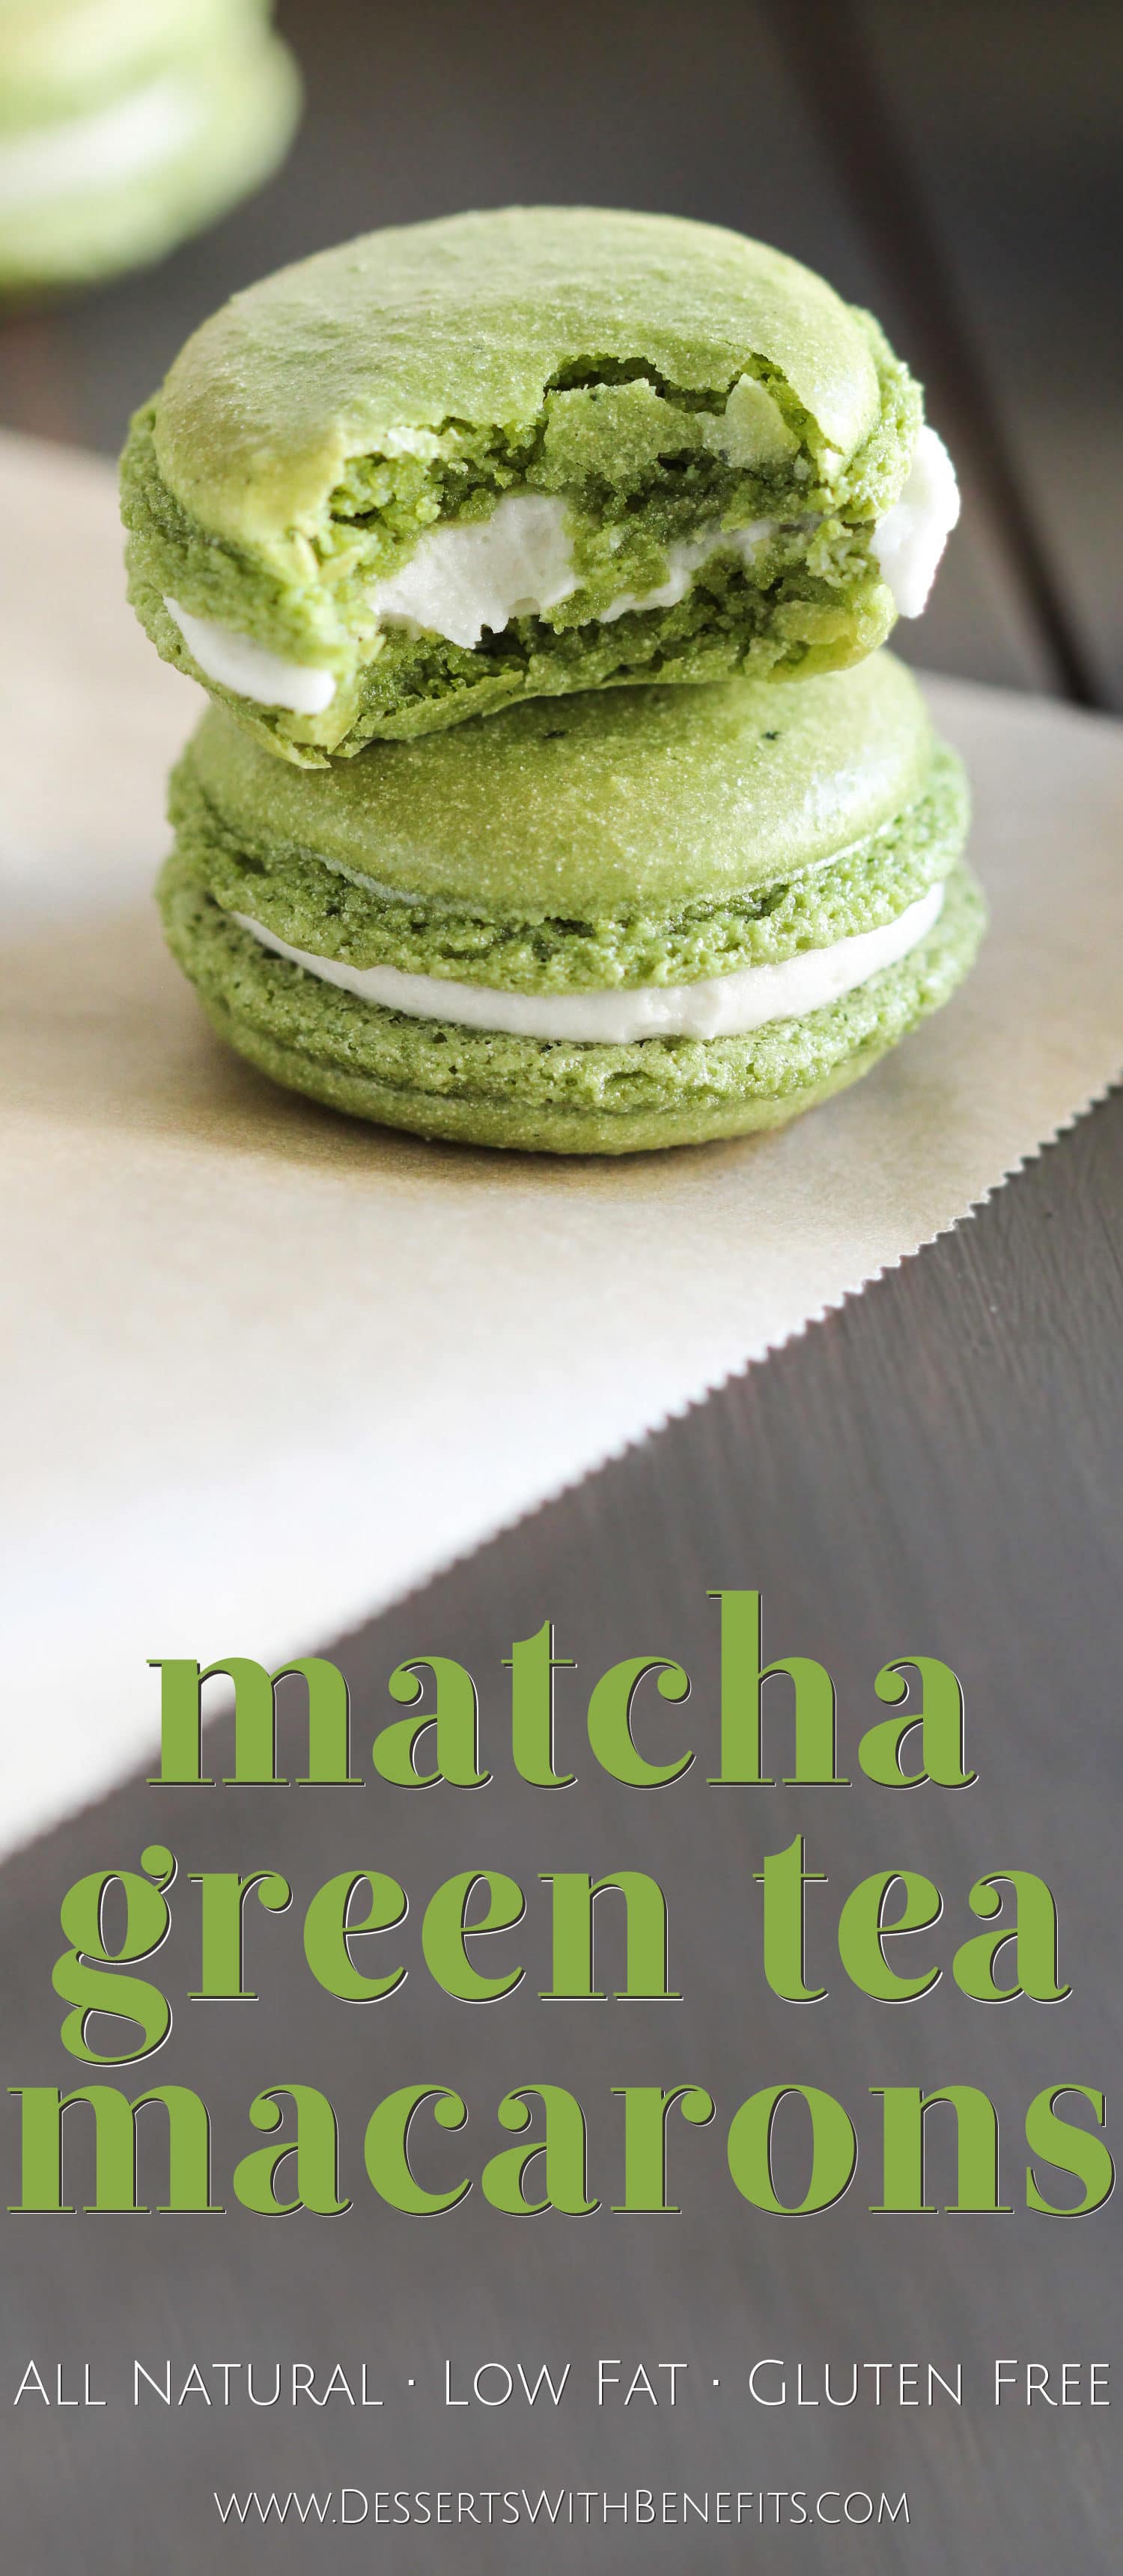 These Healthy Matcha Green Tea French Macarons aren't your typical macarons... these are made without the bleached white sugar, artificial flavorings, and artificial food dyes! That vibrant green you see is ALL NATURAL. These bite-sized treats are sweet, addicting, unique, and sophisticated. They're all natural, low fat, and gluten free too! Healthy Dessert Recipes at the Desserts With Benefits Blog